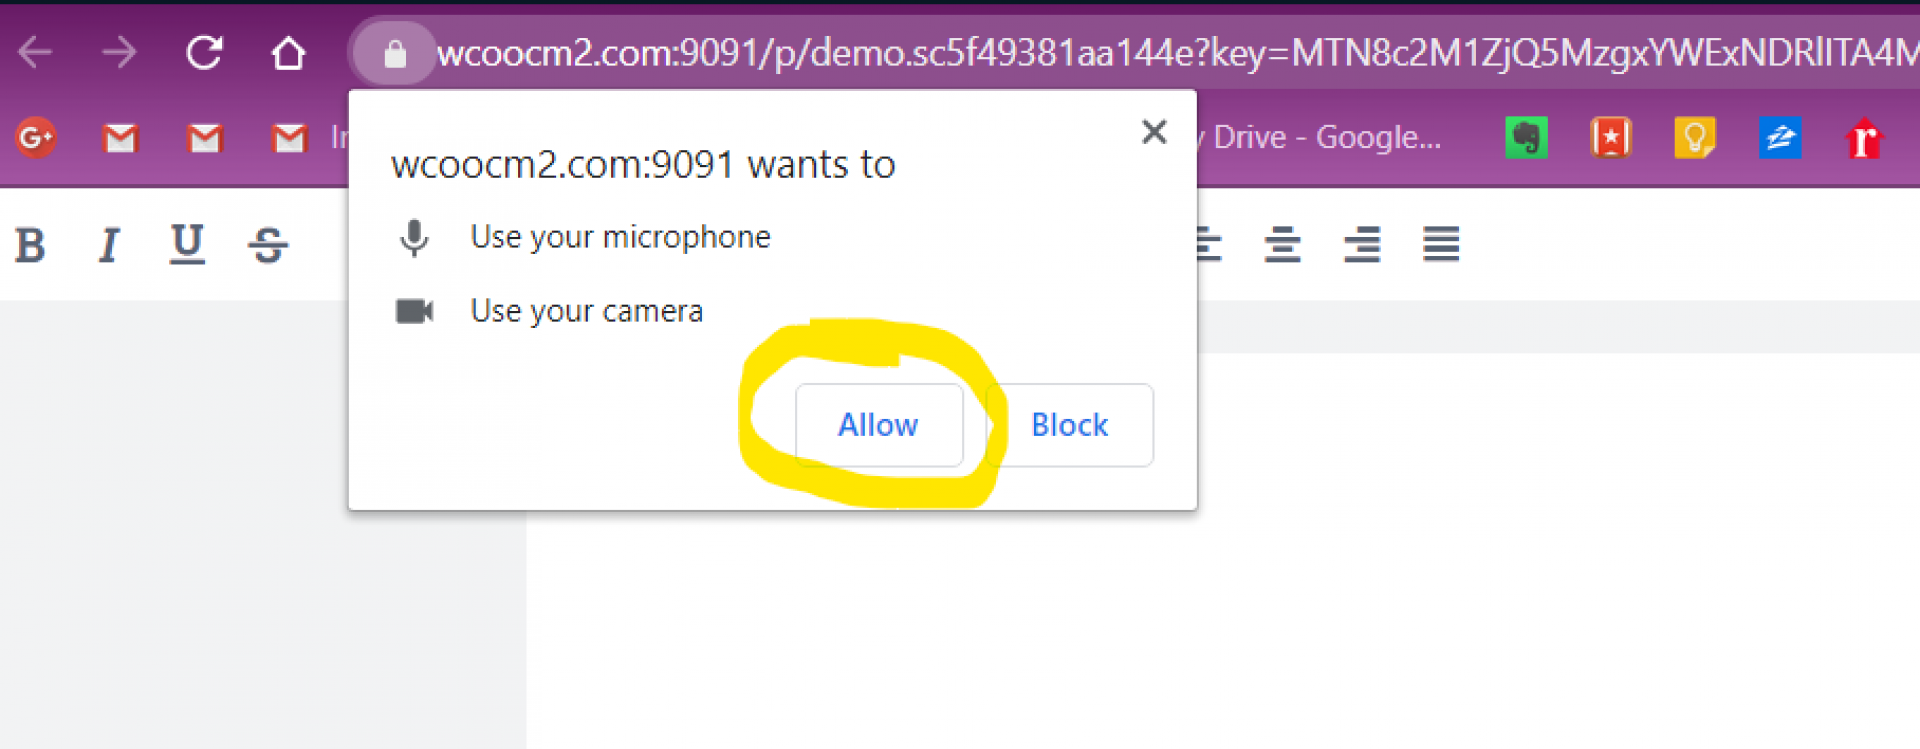 A browser request to accept the use of a camera and microphone with "Allow" circled.